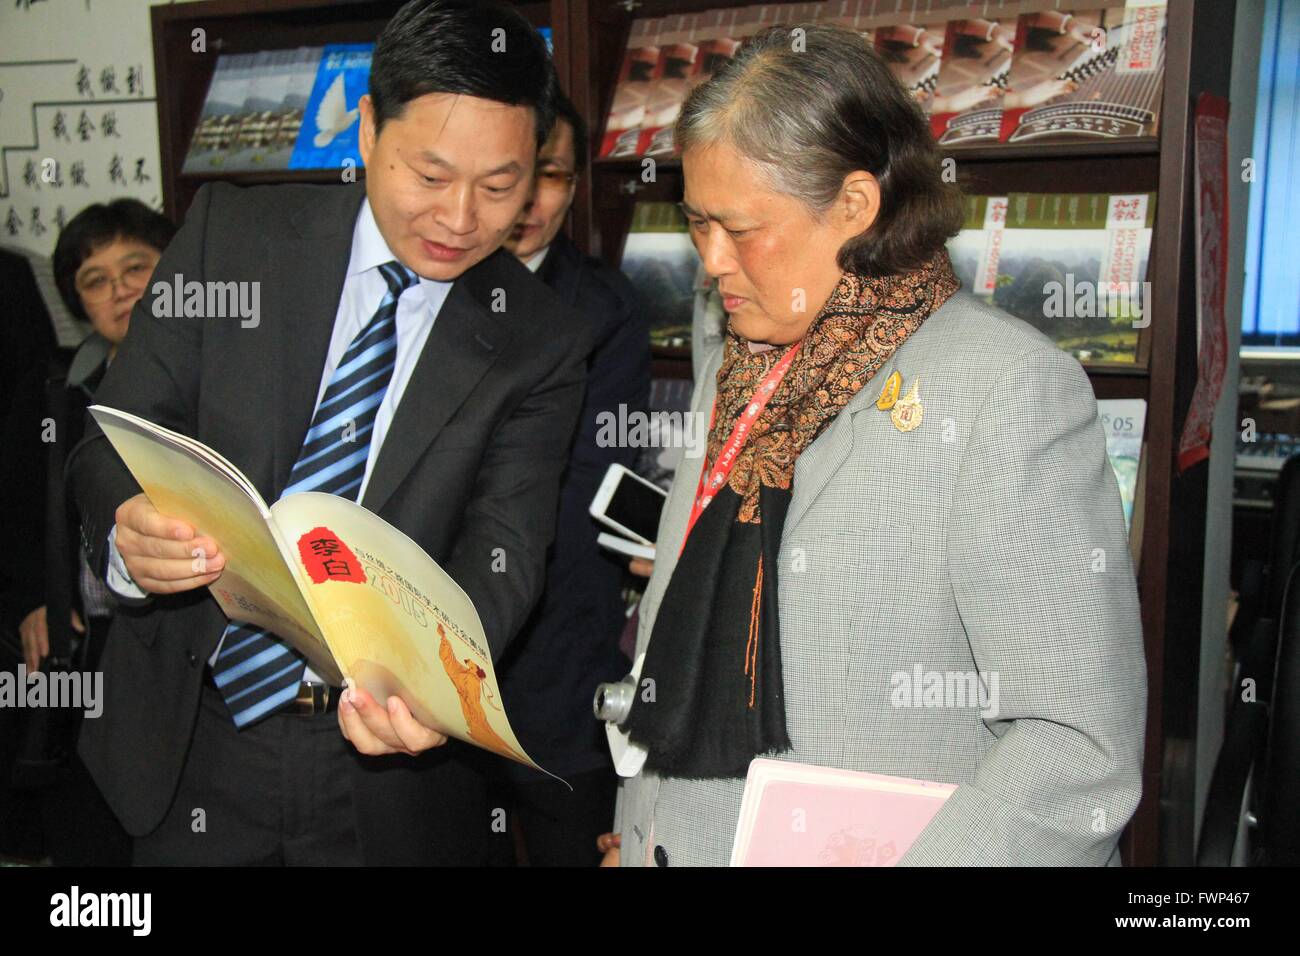 Bishkek. 7th Apr, 2016. Thai Crown Princess Maha Chakri Sirindhorn (R) visits the Confucius Institute in Bishkek, Kyrgyzstan, on April 7, 2016. Thai crown princess Maha Chakri Sirindhorn visited on April 7 the Confucius Institute of Kyrgyz National University during her first visit to Kyrgyzstan. In the Confucius Institute, the Thai princess talked in Chinese with students and teachers, wrote in Chinese calligraphy 'Knowledge is infinite' and even recited the Chinese poetry 'Quiet Night Thoughts' of the famous ancient Chinese poet Li Bai. Credit:  Xinhua/Alamy Live News Stock Photo